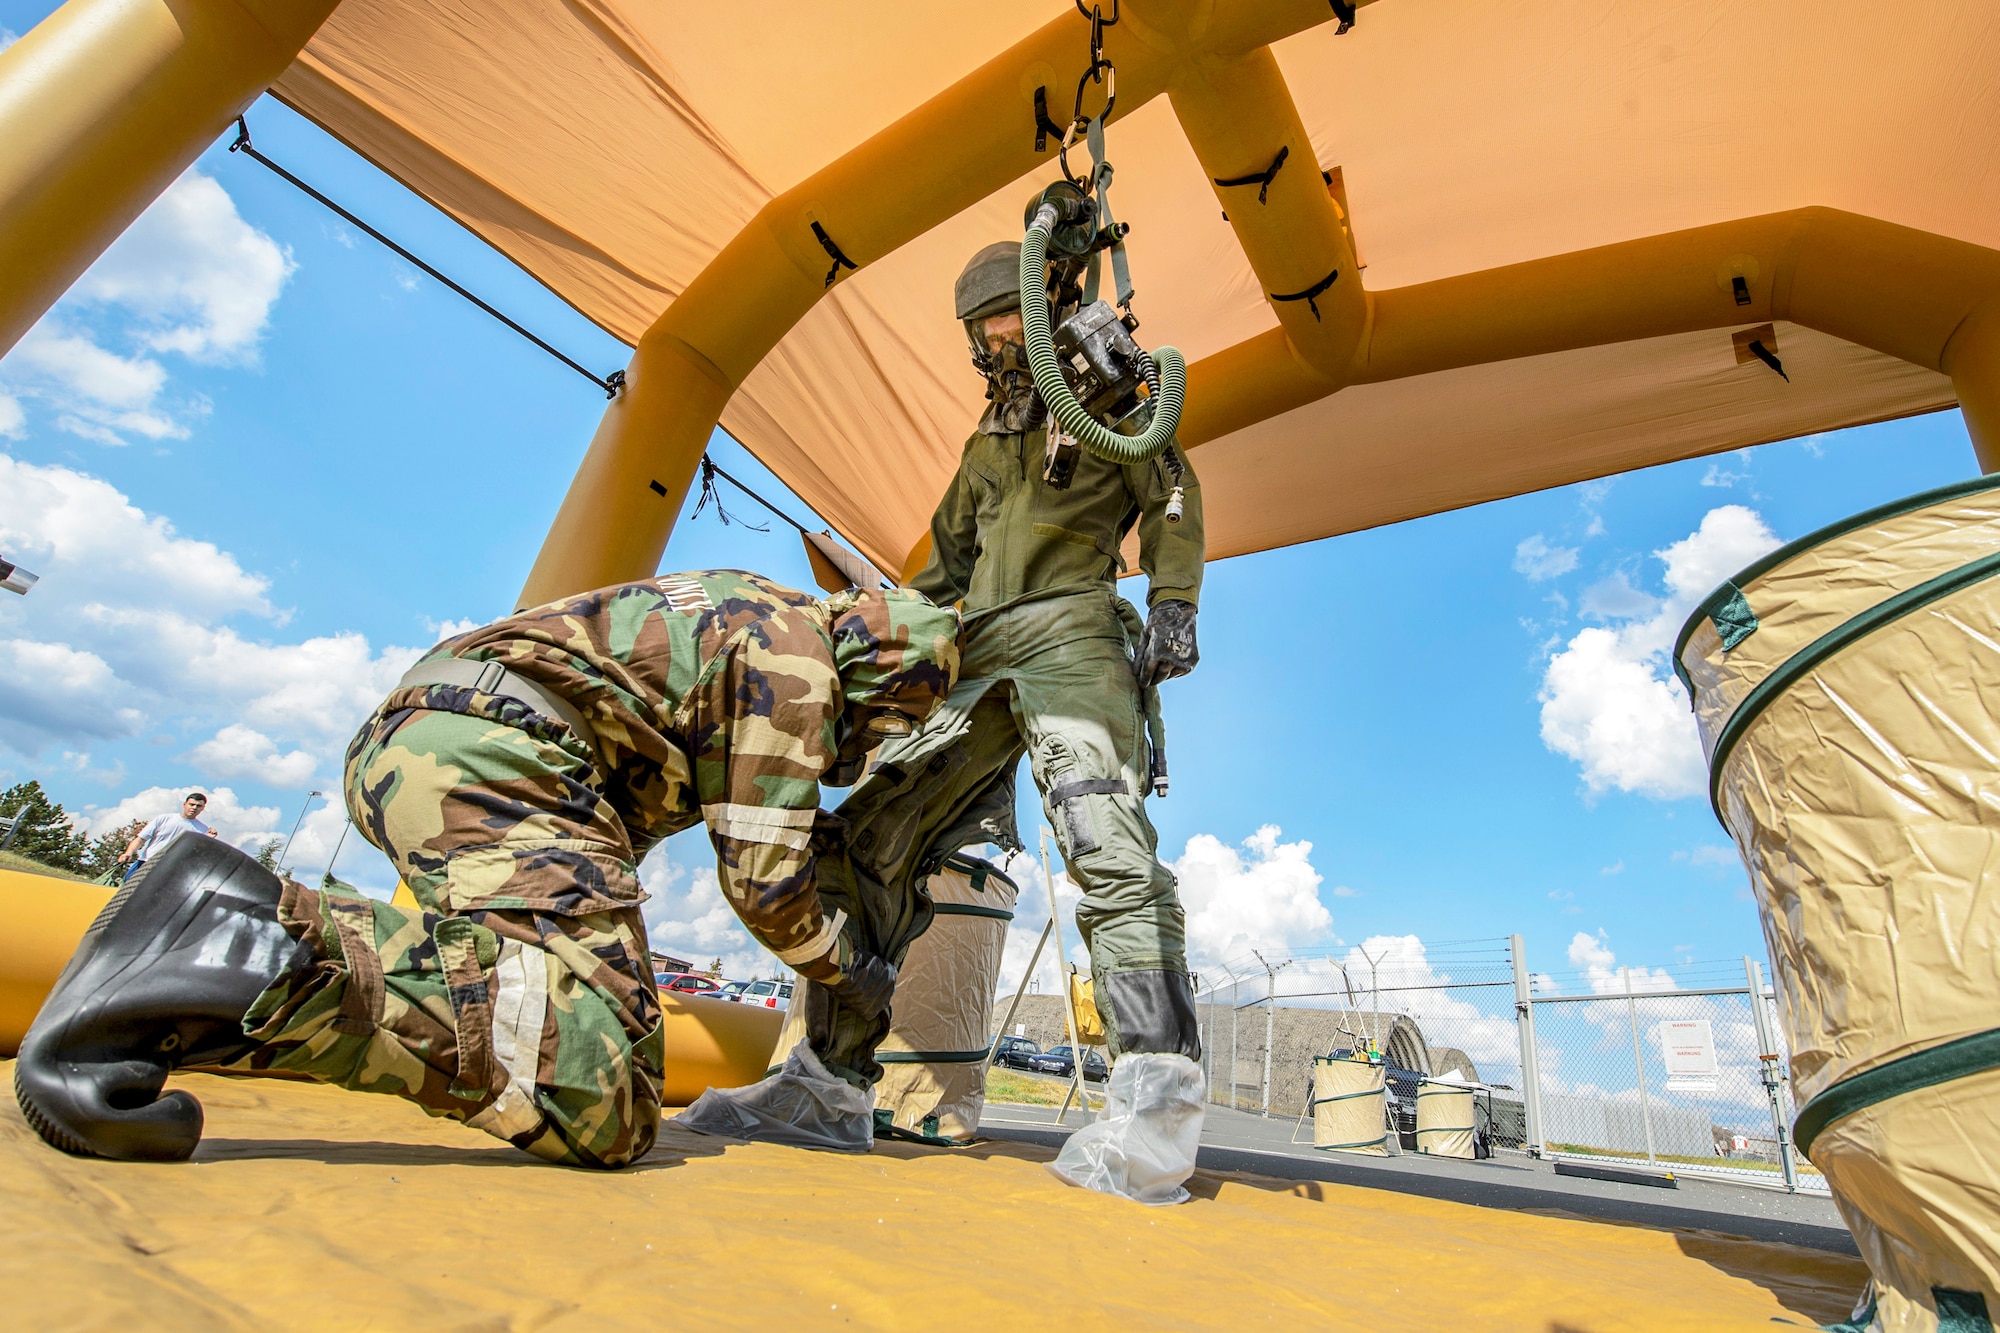 Senior Airman Austin Lebrun, left, 52nd Operation Support Squadron aircrew flight equipment journeyman, works on decontaminating Capt. Logan Mitchell, 52nd OSS AFE flight commander, during decontamination training at Spangdahlem Air Base, Germany, Aug. 23, 2018. The training involved a nine-station decontamination process demonstrating that the mission can still be accomplished in a chemical, biological, radiological and nuclear environment. (U.S. Air Force photo by Staff Sgt. Jonathan Snyder)